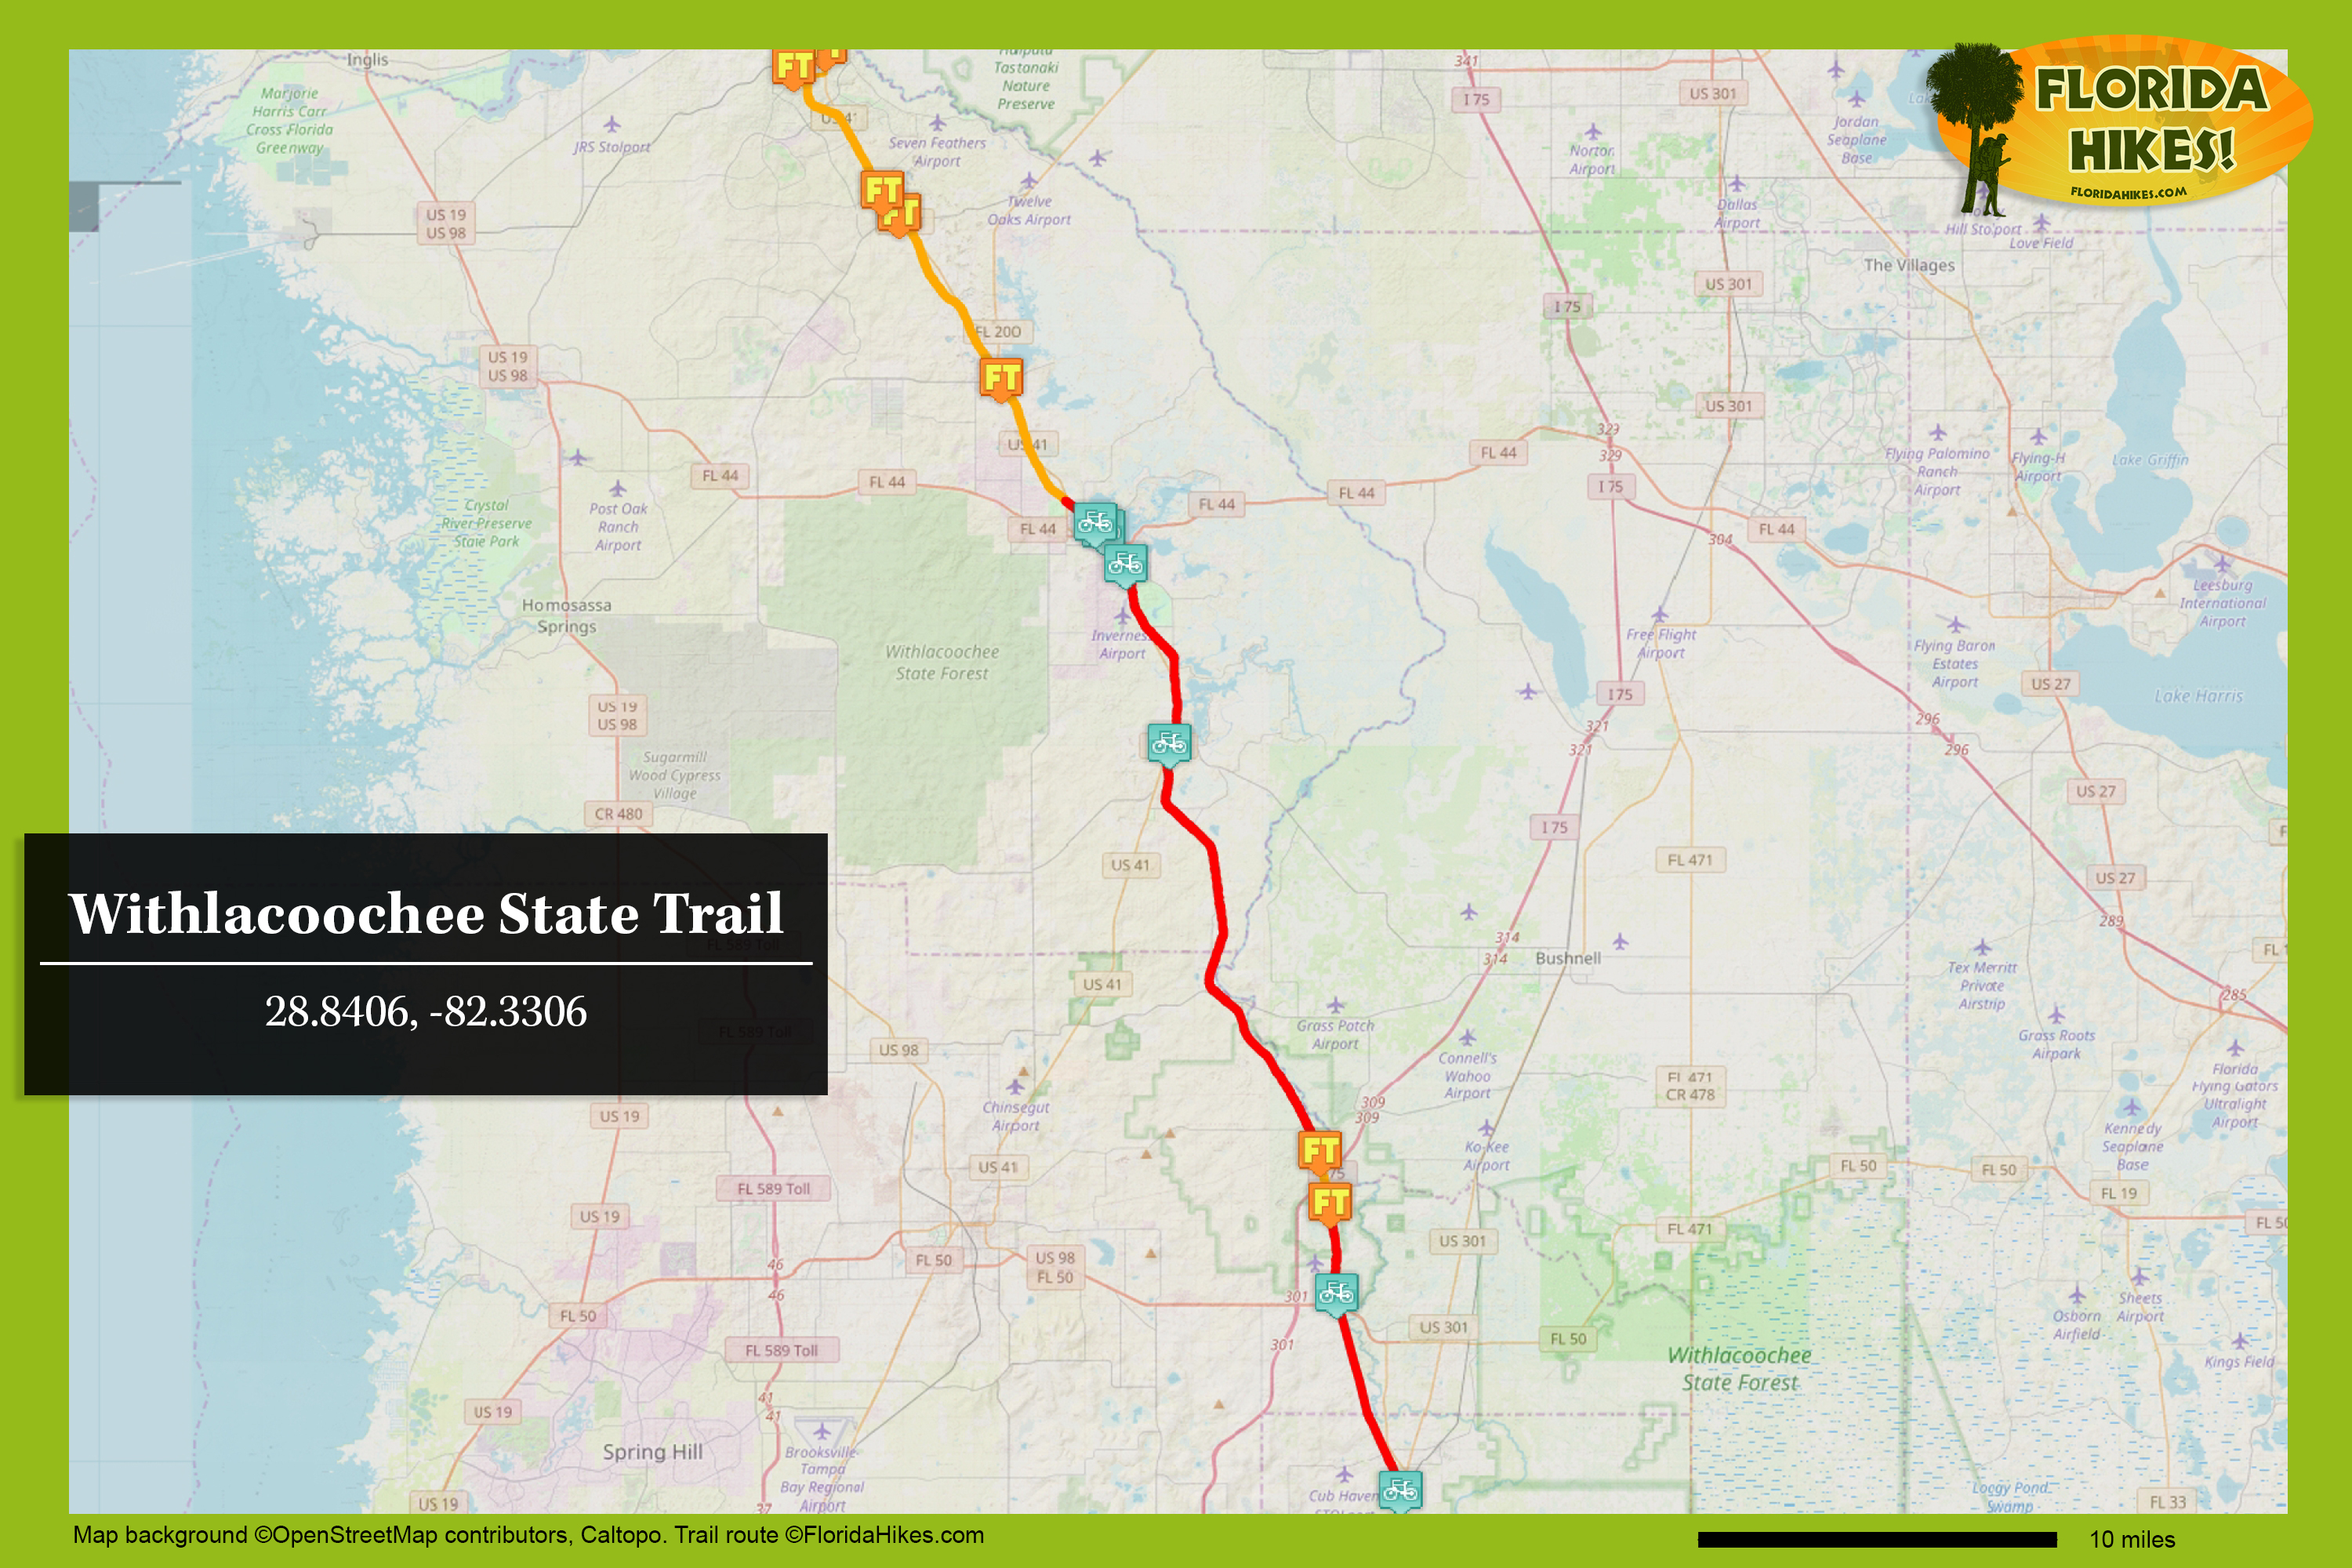 Withlacoochee State Trail | Florida Hikes! - Florida Rails To Trails Maps